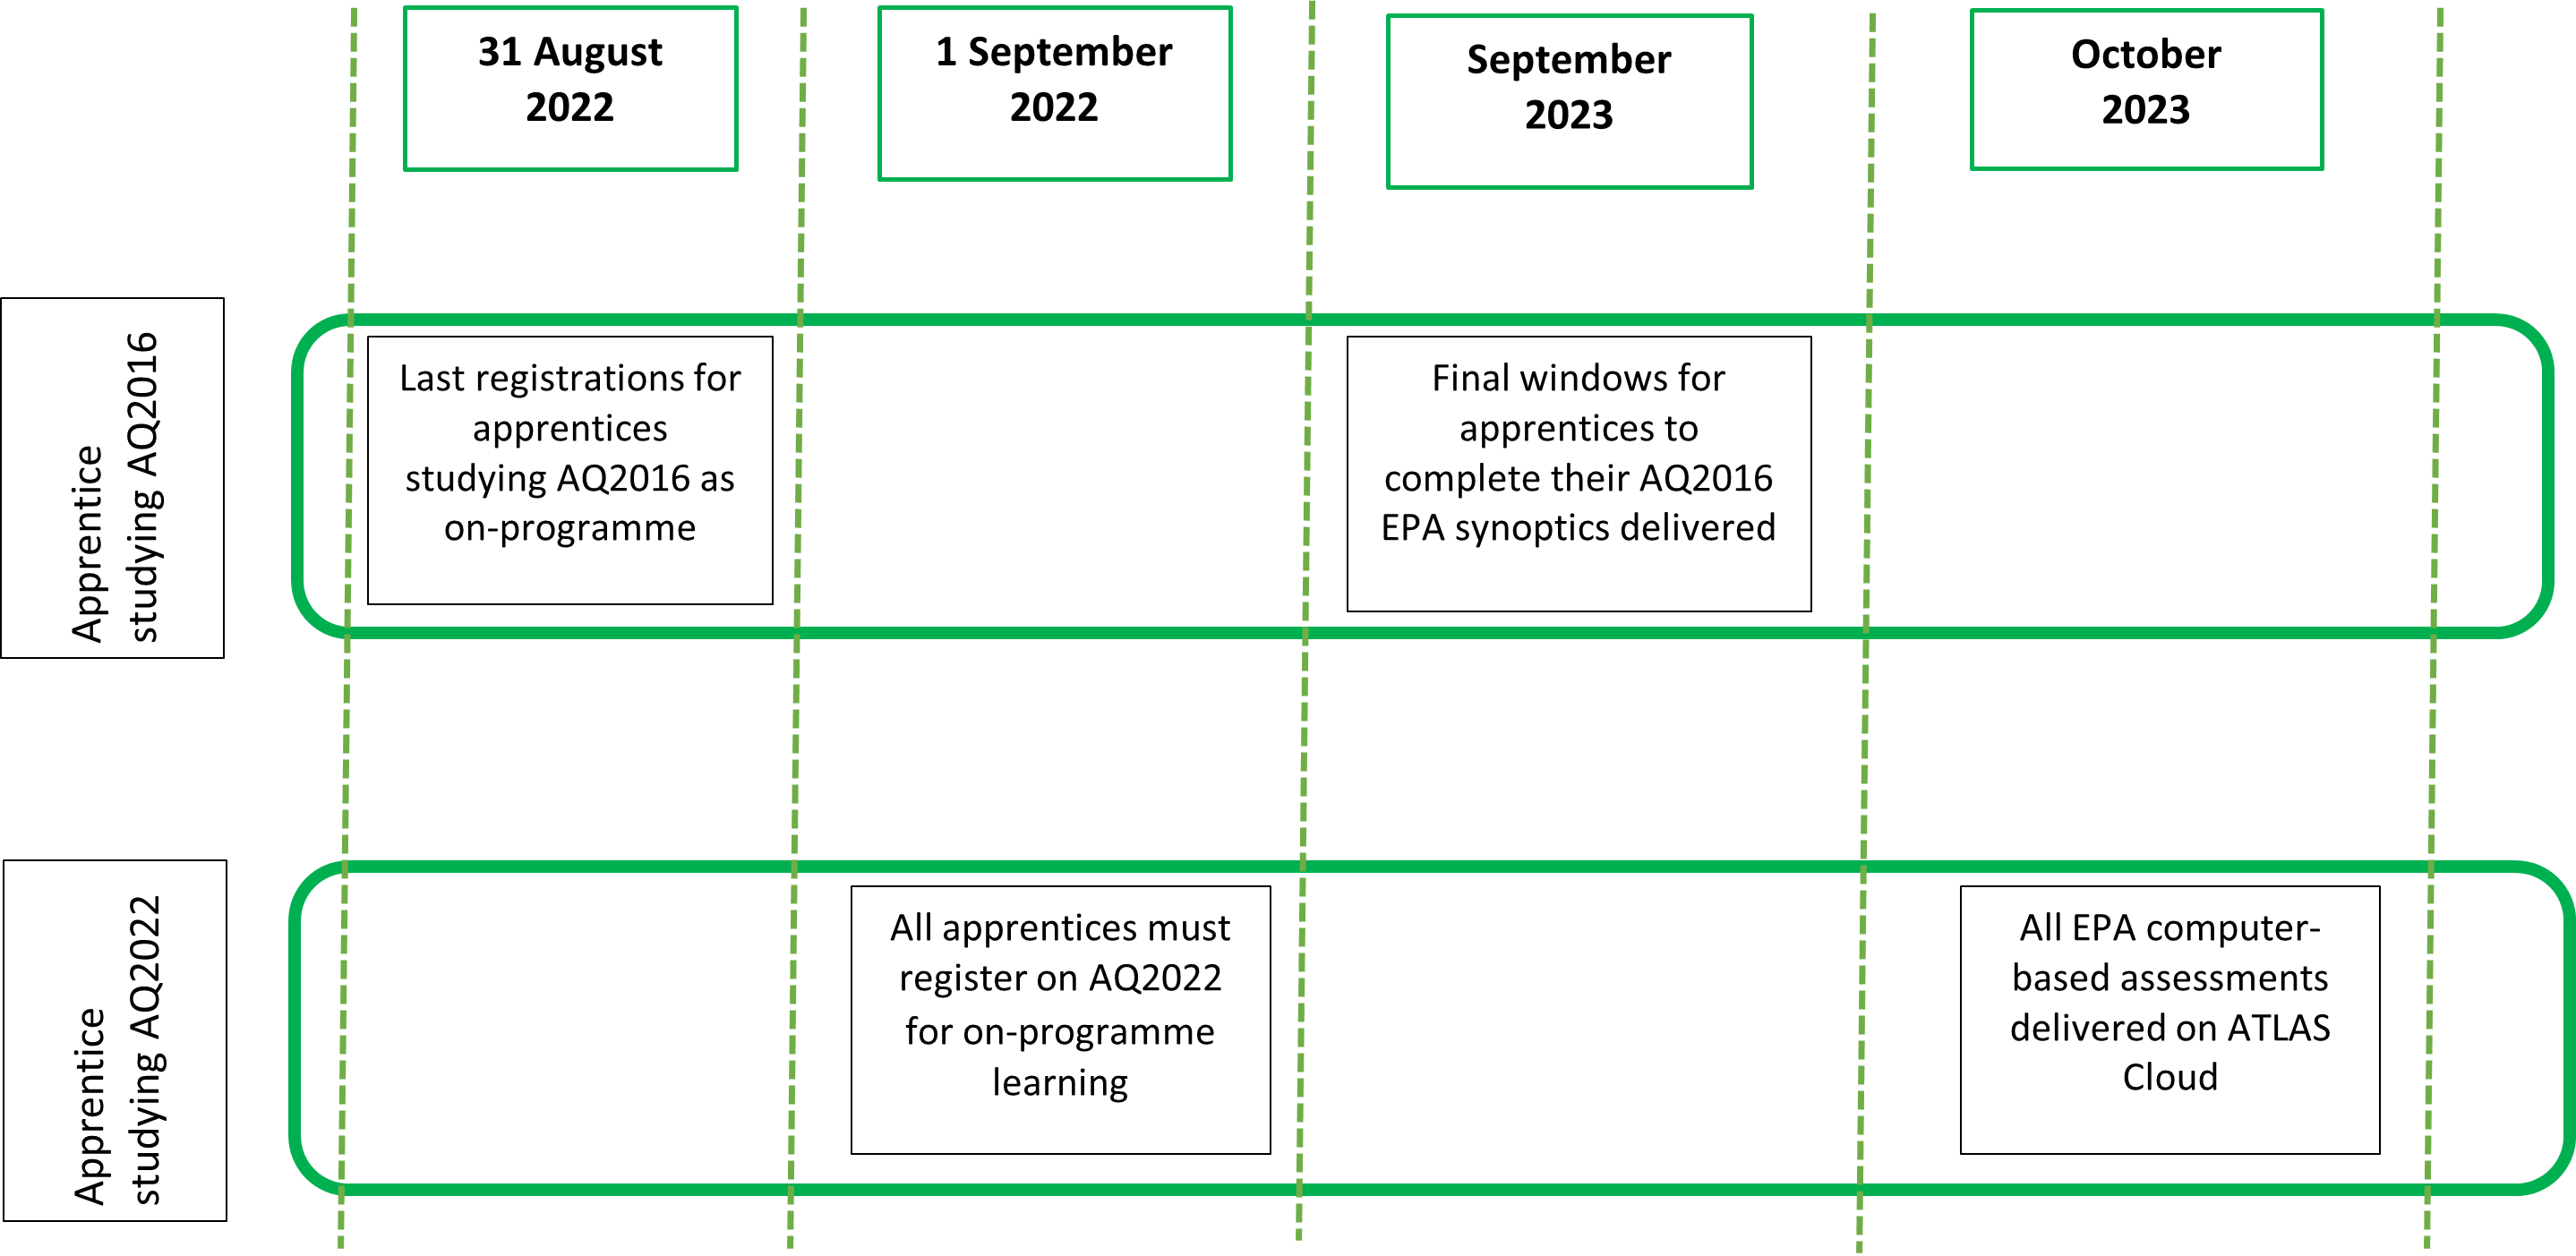 Timeline for apprentices completing AQ2016 or Qualifications 2022 as part of on-programme learning